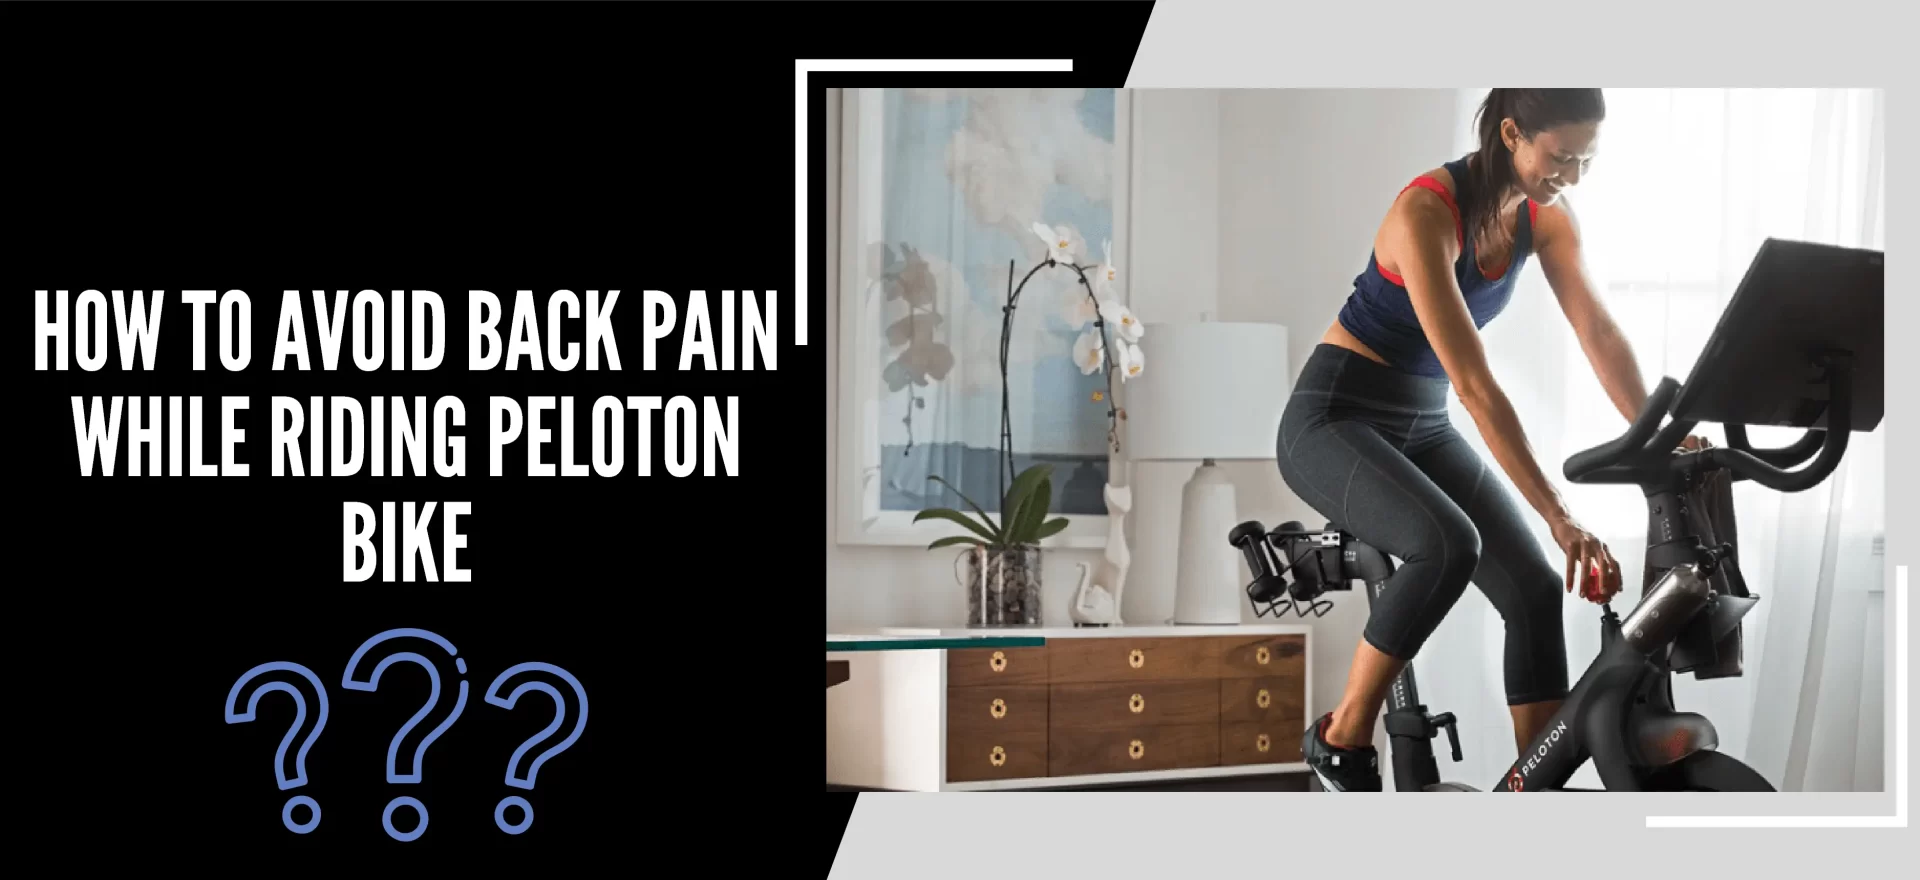 How To Avoid Back Pain While Riding Peloton Bike